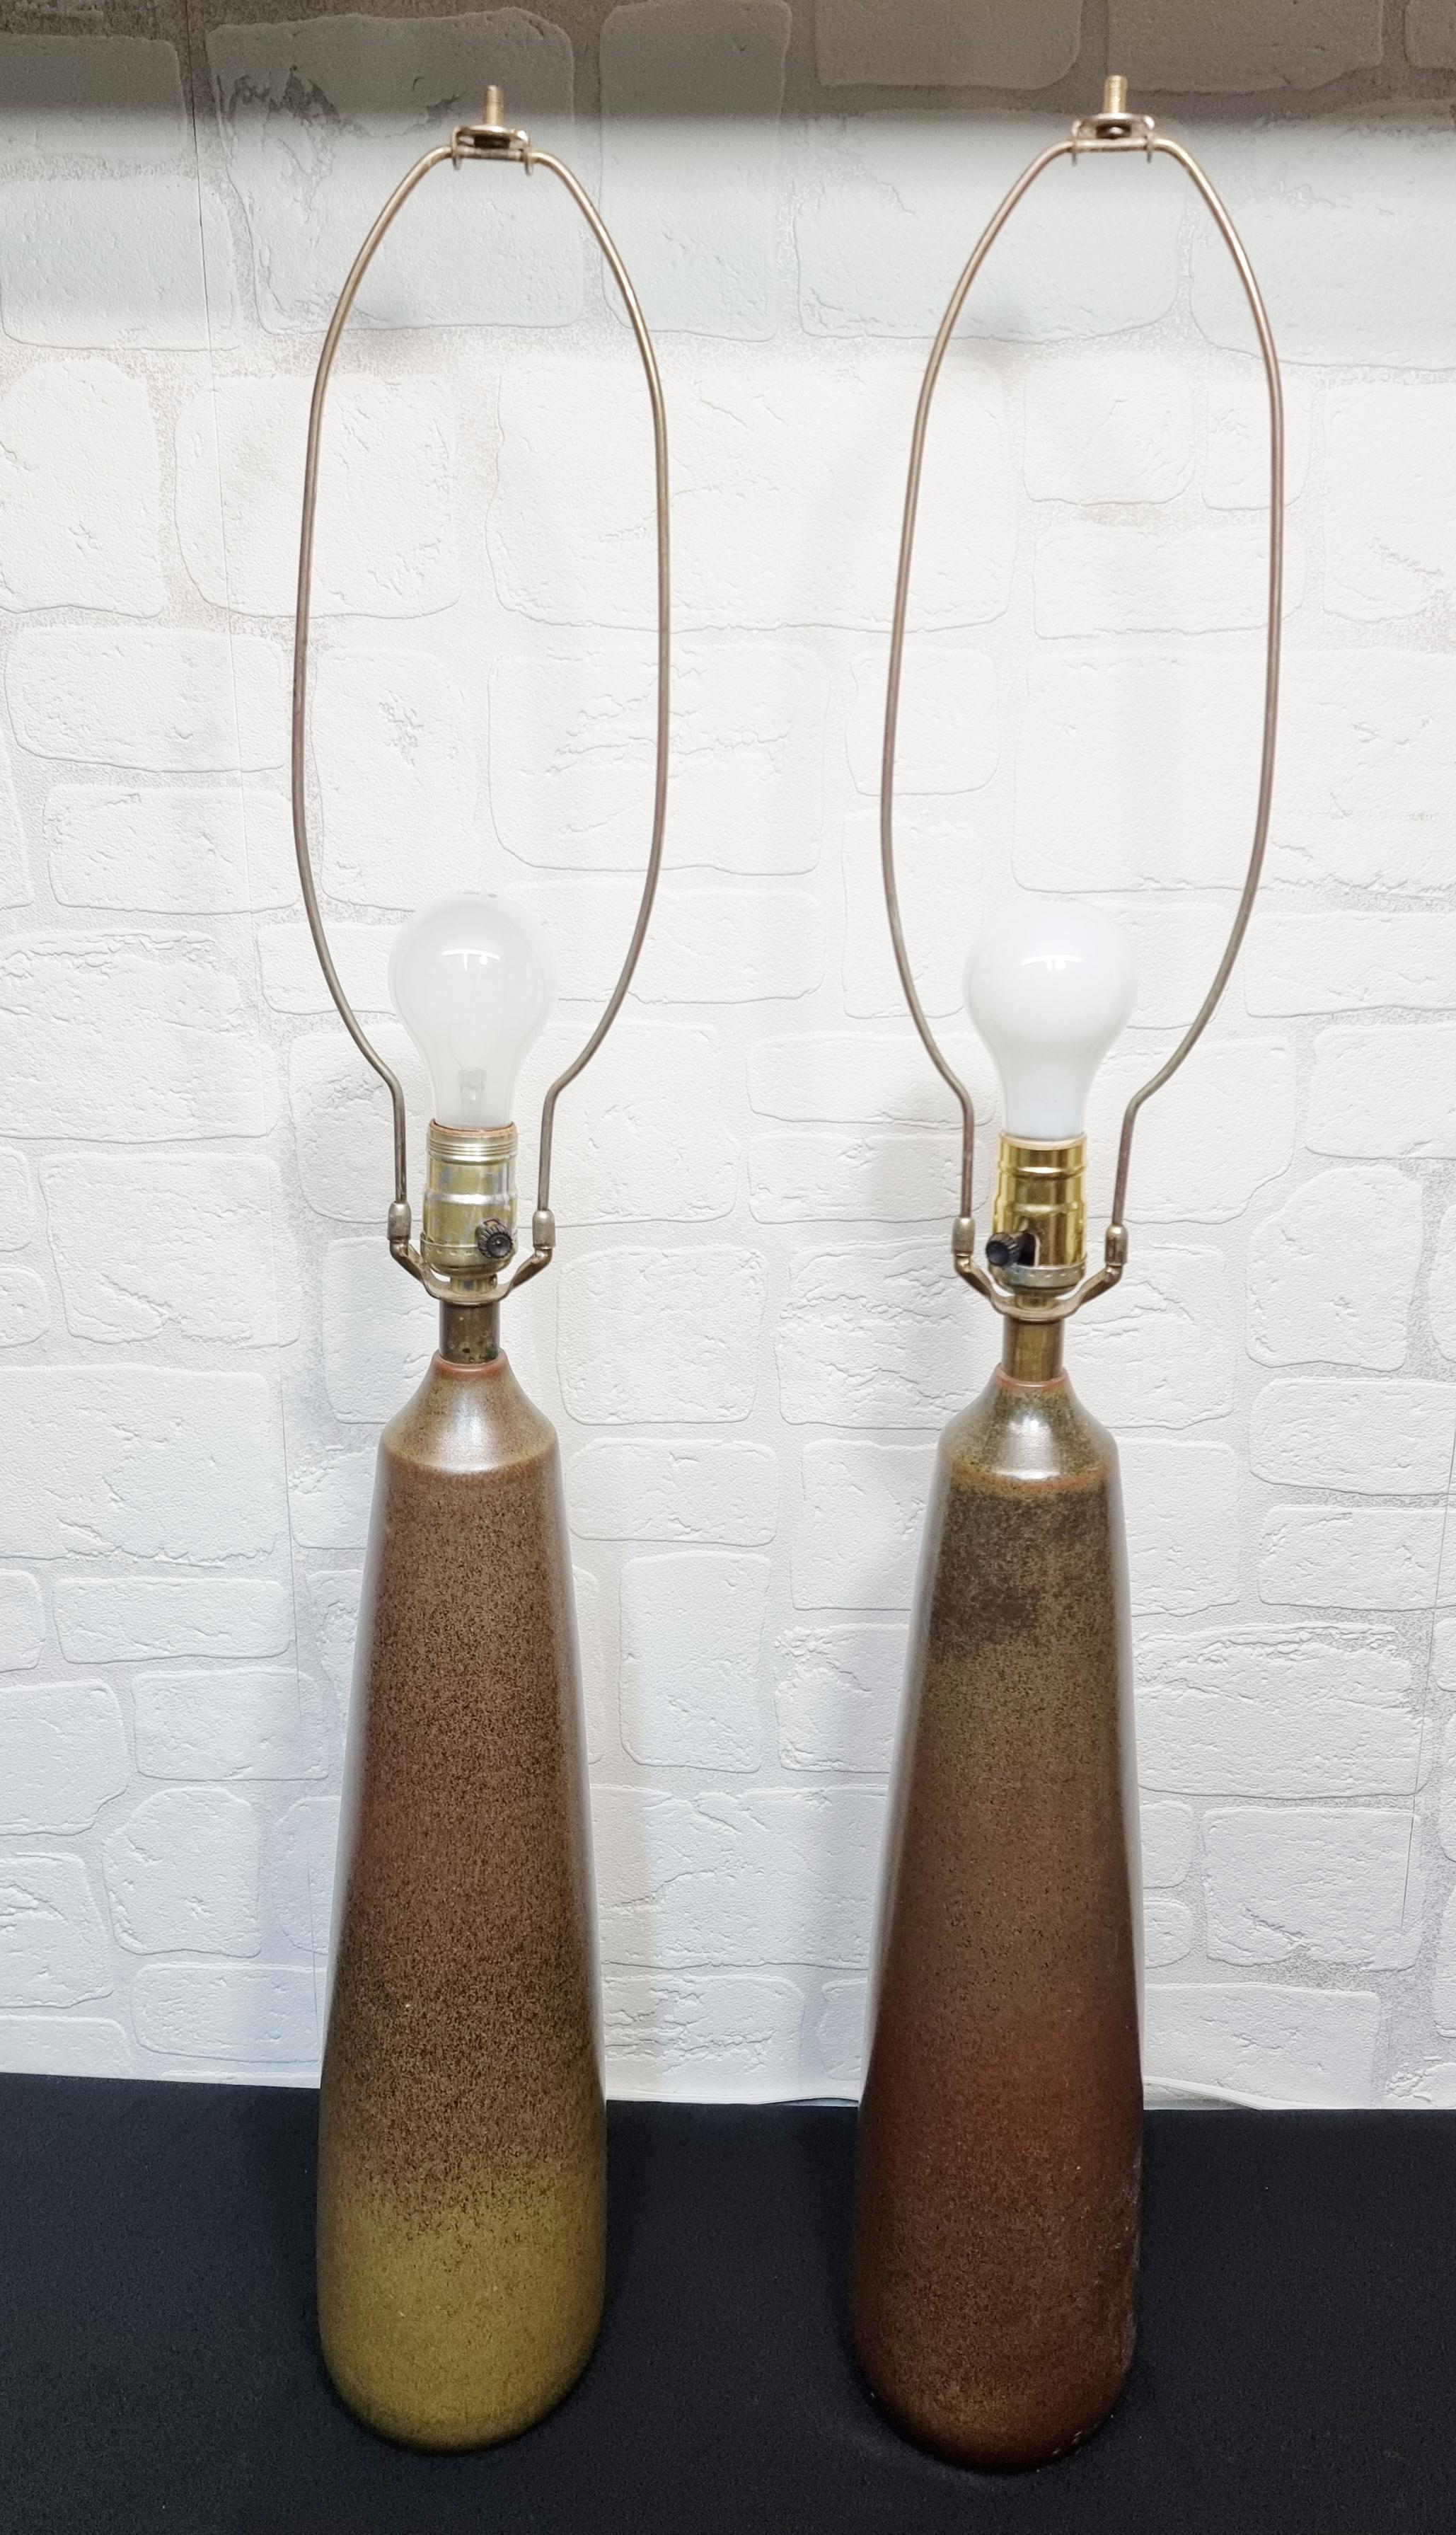 Impressive Large Pair of 1960's Ceramic Lamps by Lotte and Gunnar Bostlund  In Good Condition For Sale In Ottawa, Ontario